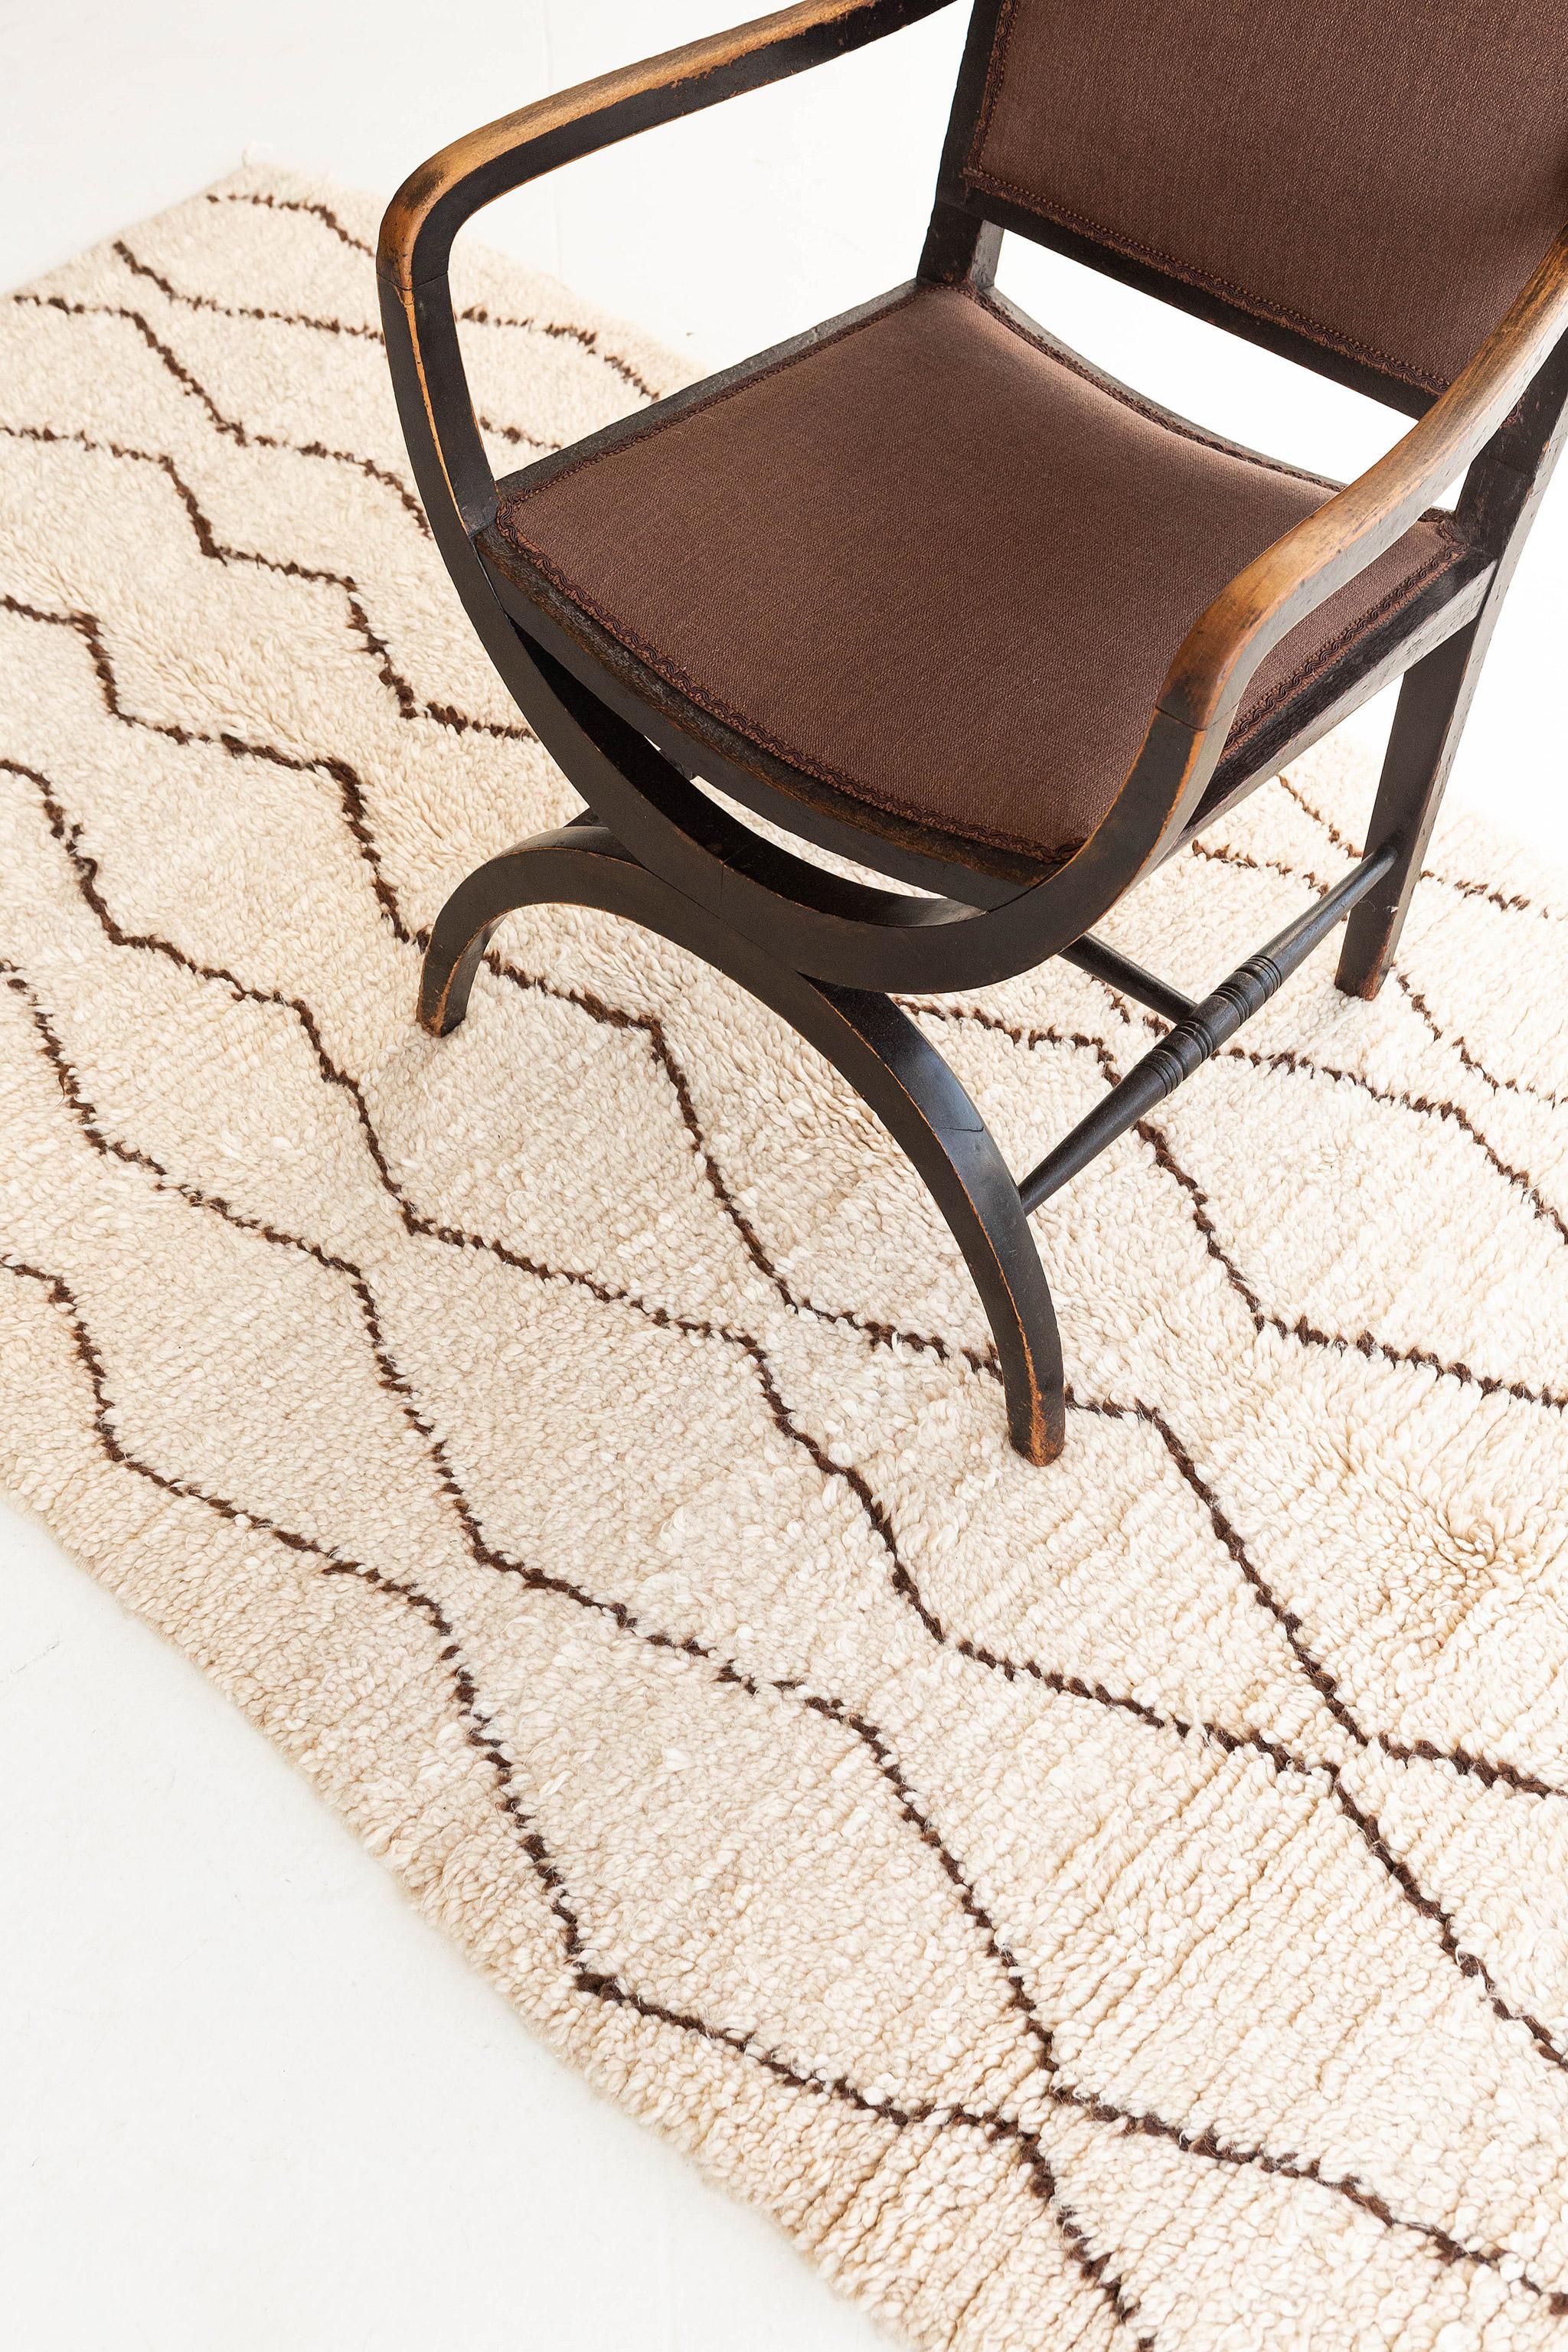 Marking a remarkable effect creating a lozenge scheme, this Moroccan Kilim rug adds texture and modest graphic appeal forming a warm, relaxed space. The field is covered in an outline of detached diamonds across the tantalizing and brilliant